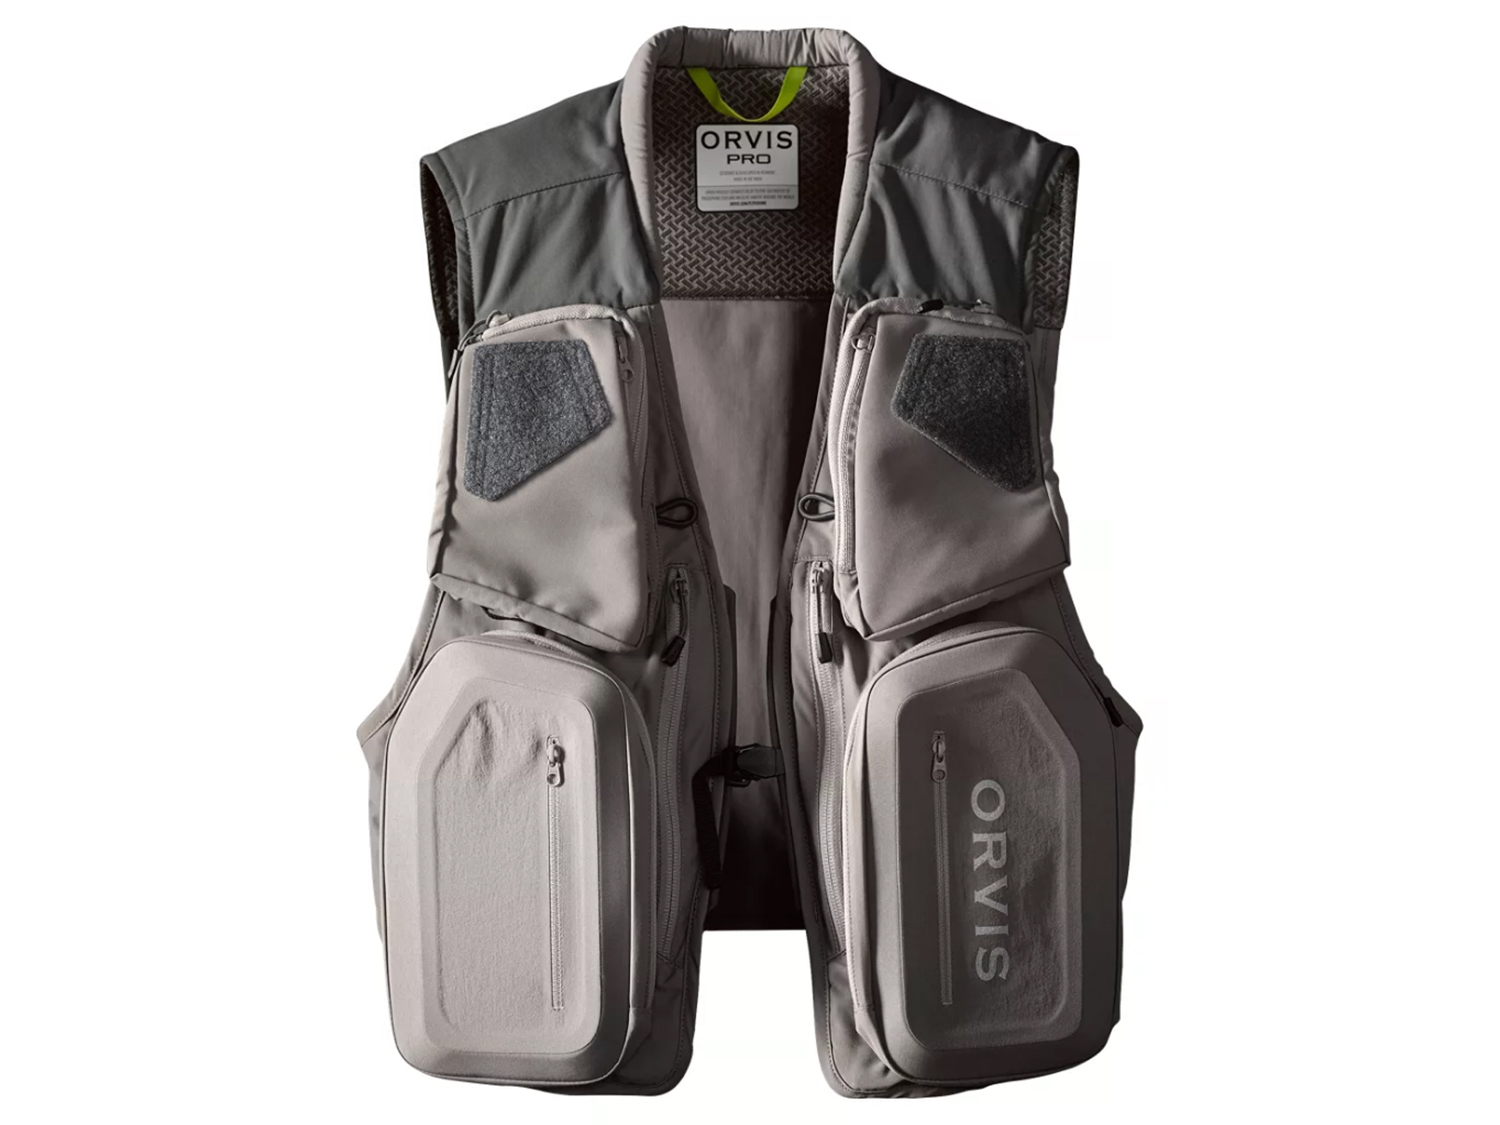 Best Fishing Vest: Fishing Equipment to Keep You Organized